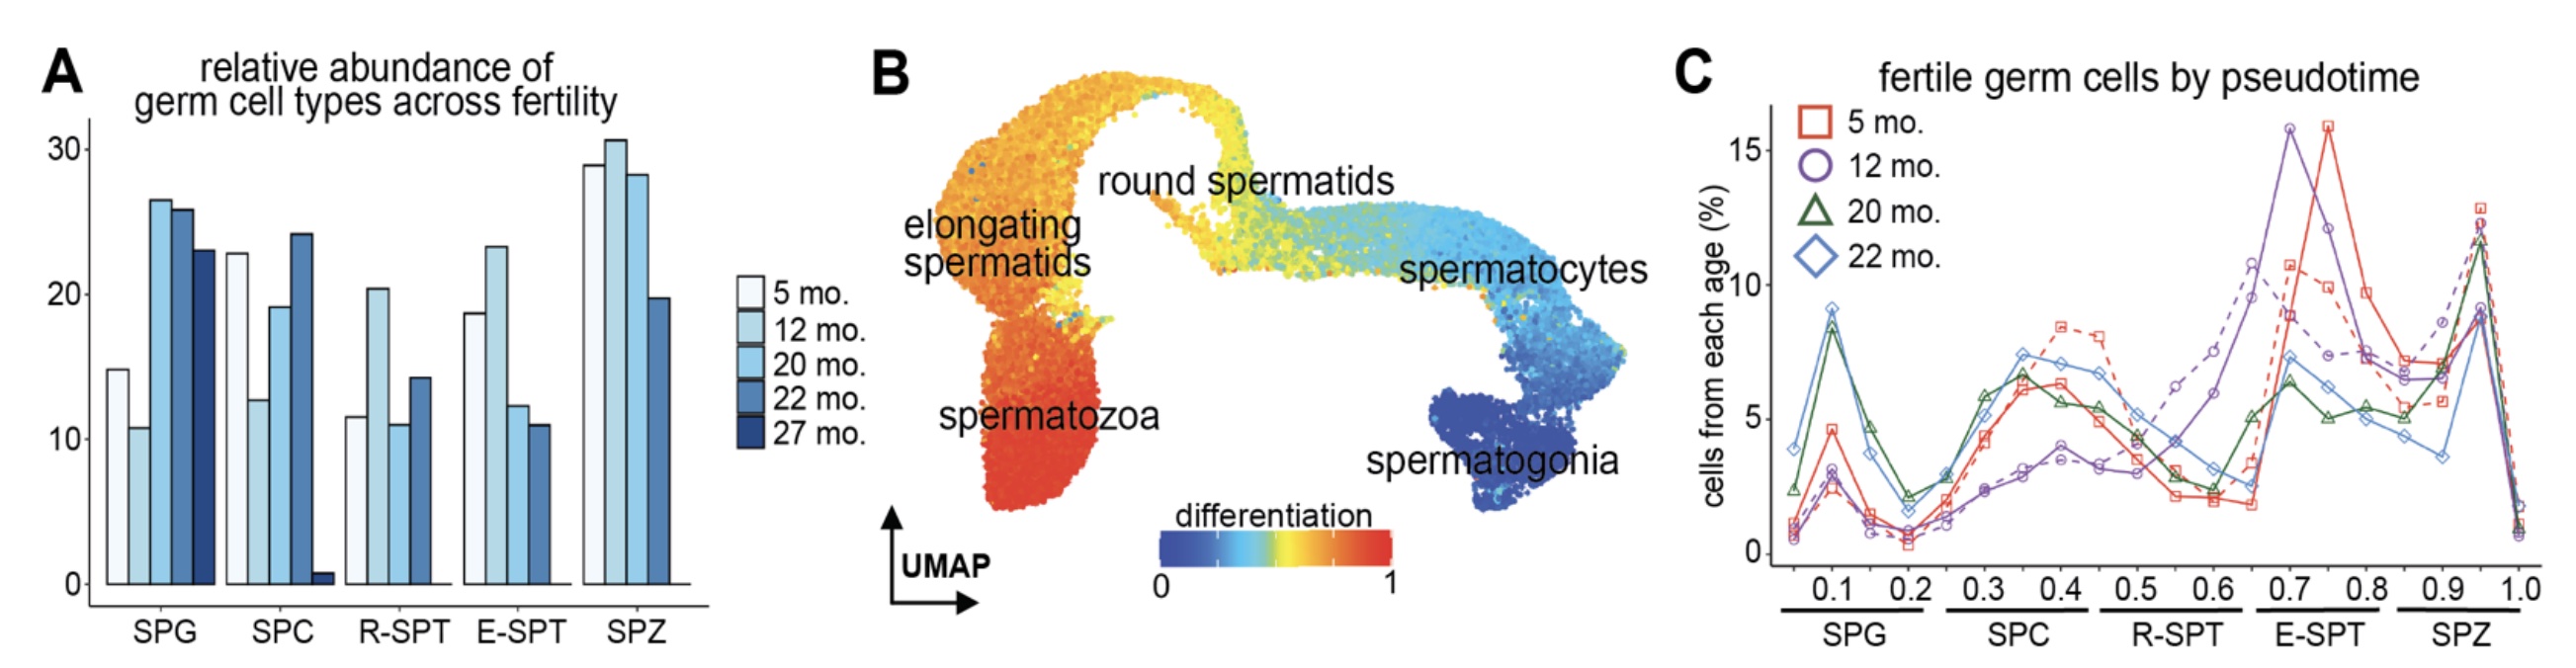 Figure from Sposato et al showing altered proportions of spermatocyte differentiation in aged testes